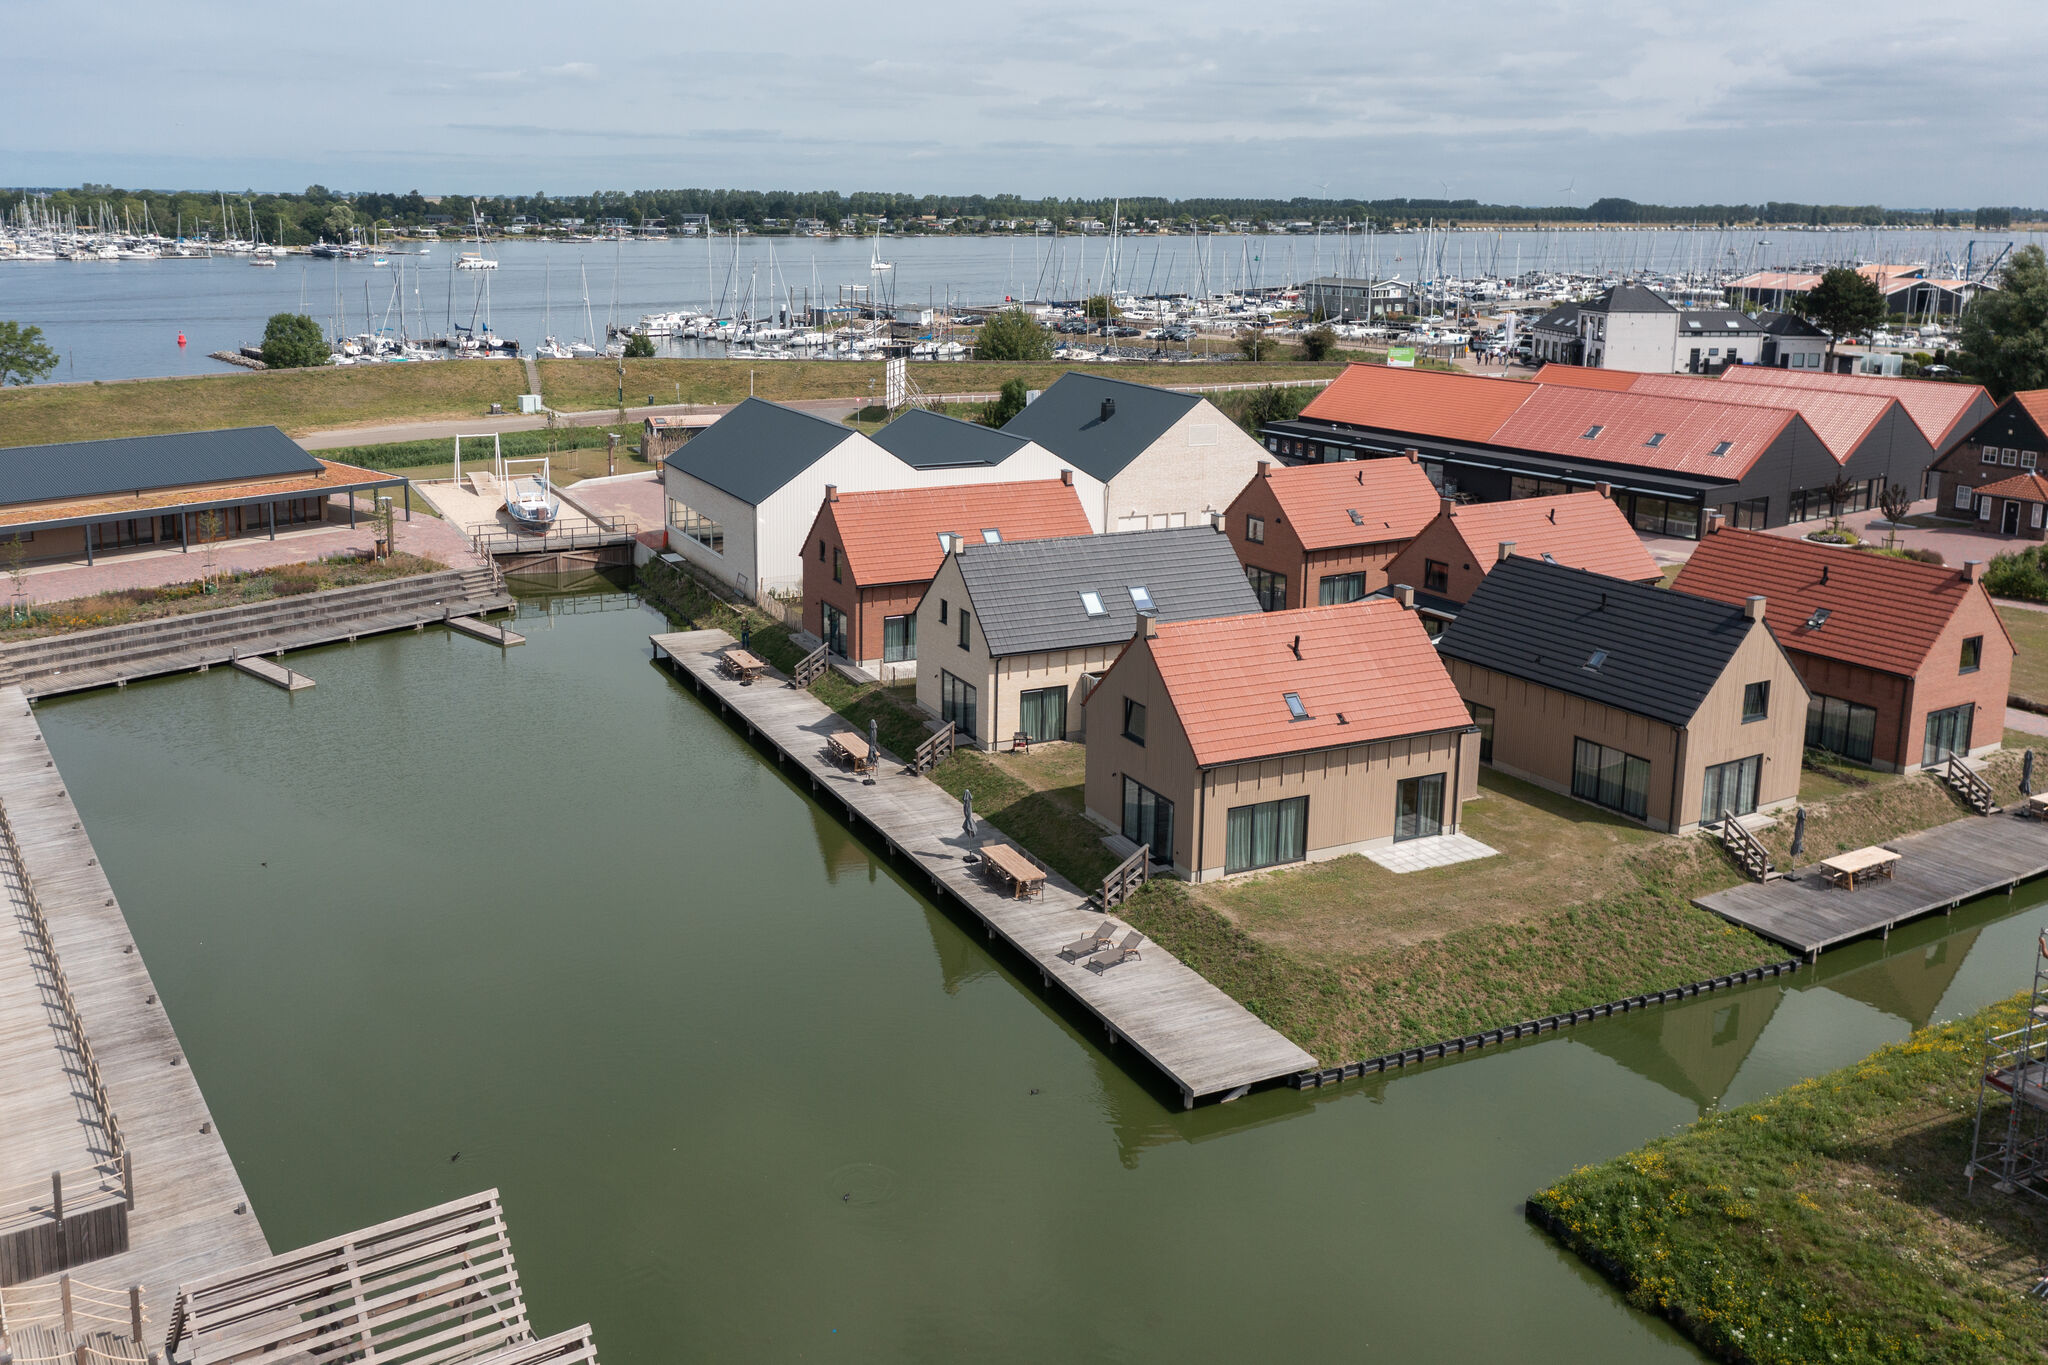 Luxury villa with sauna, located on the water, near the Veerse Meer